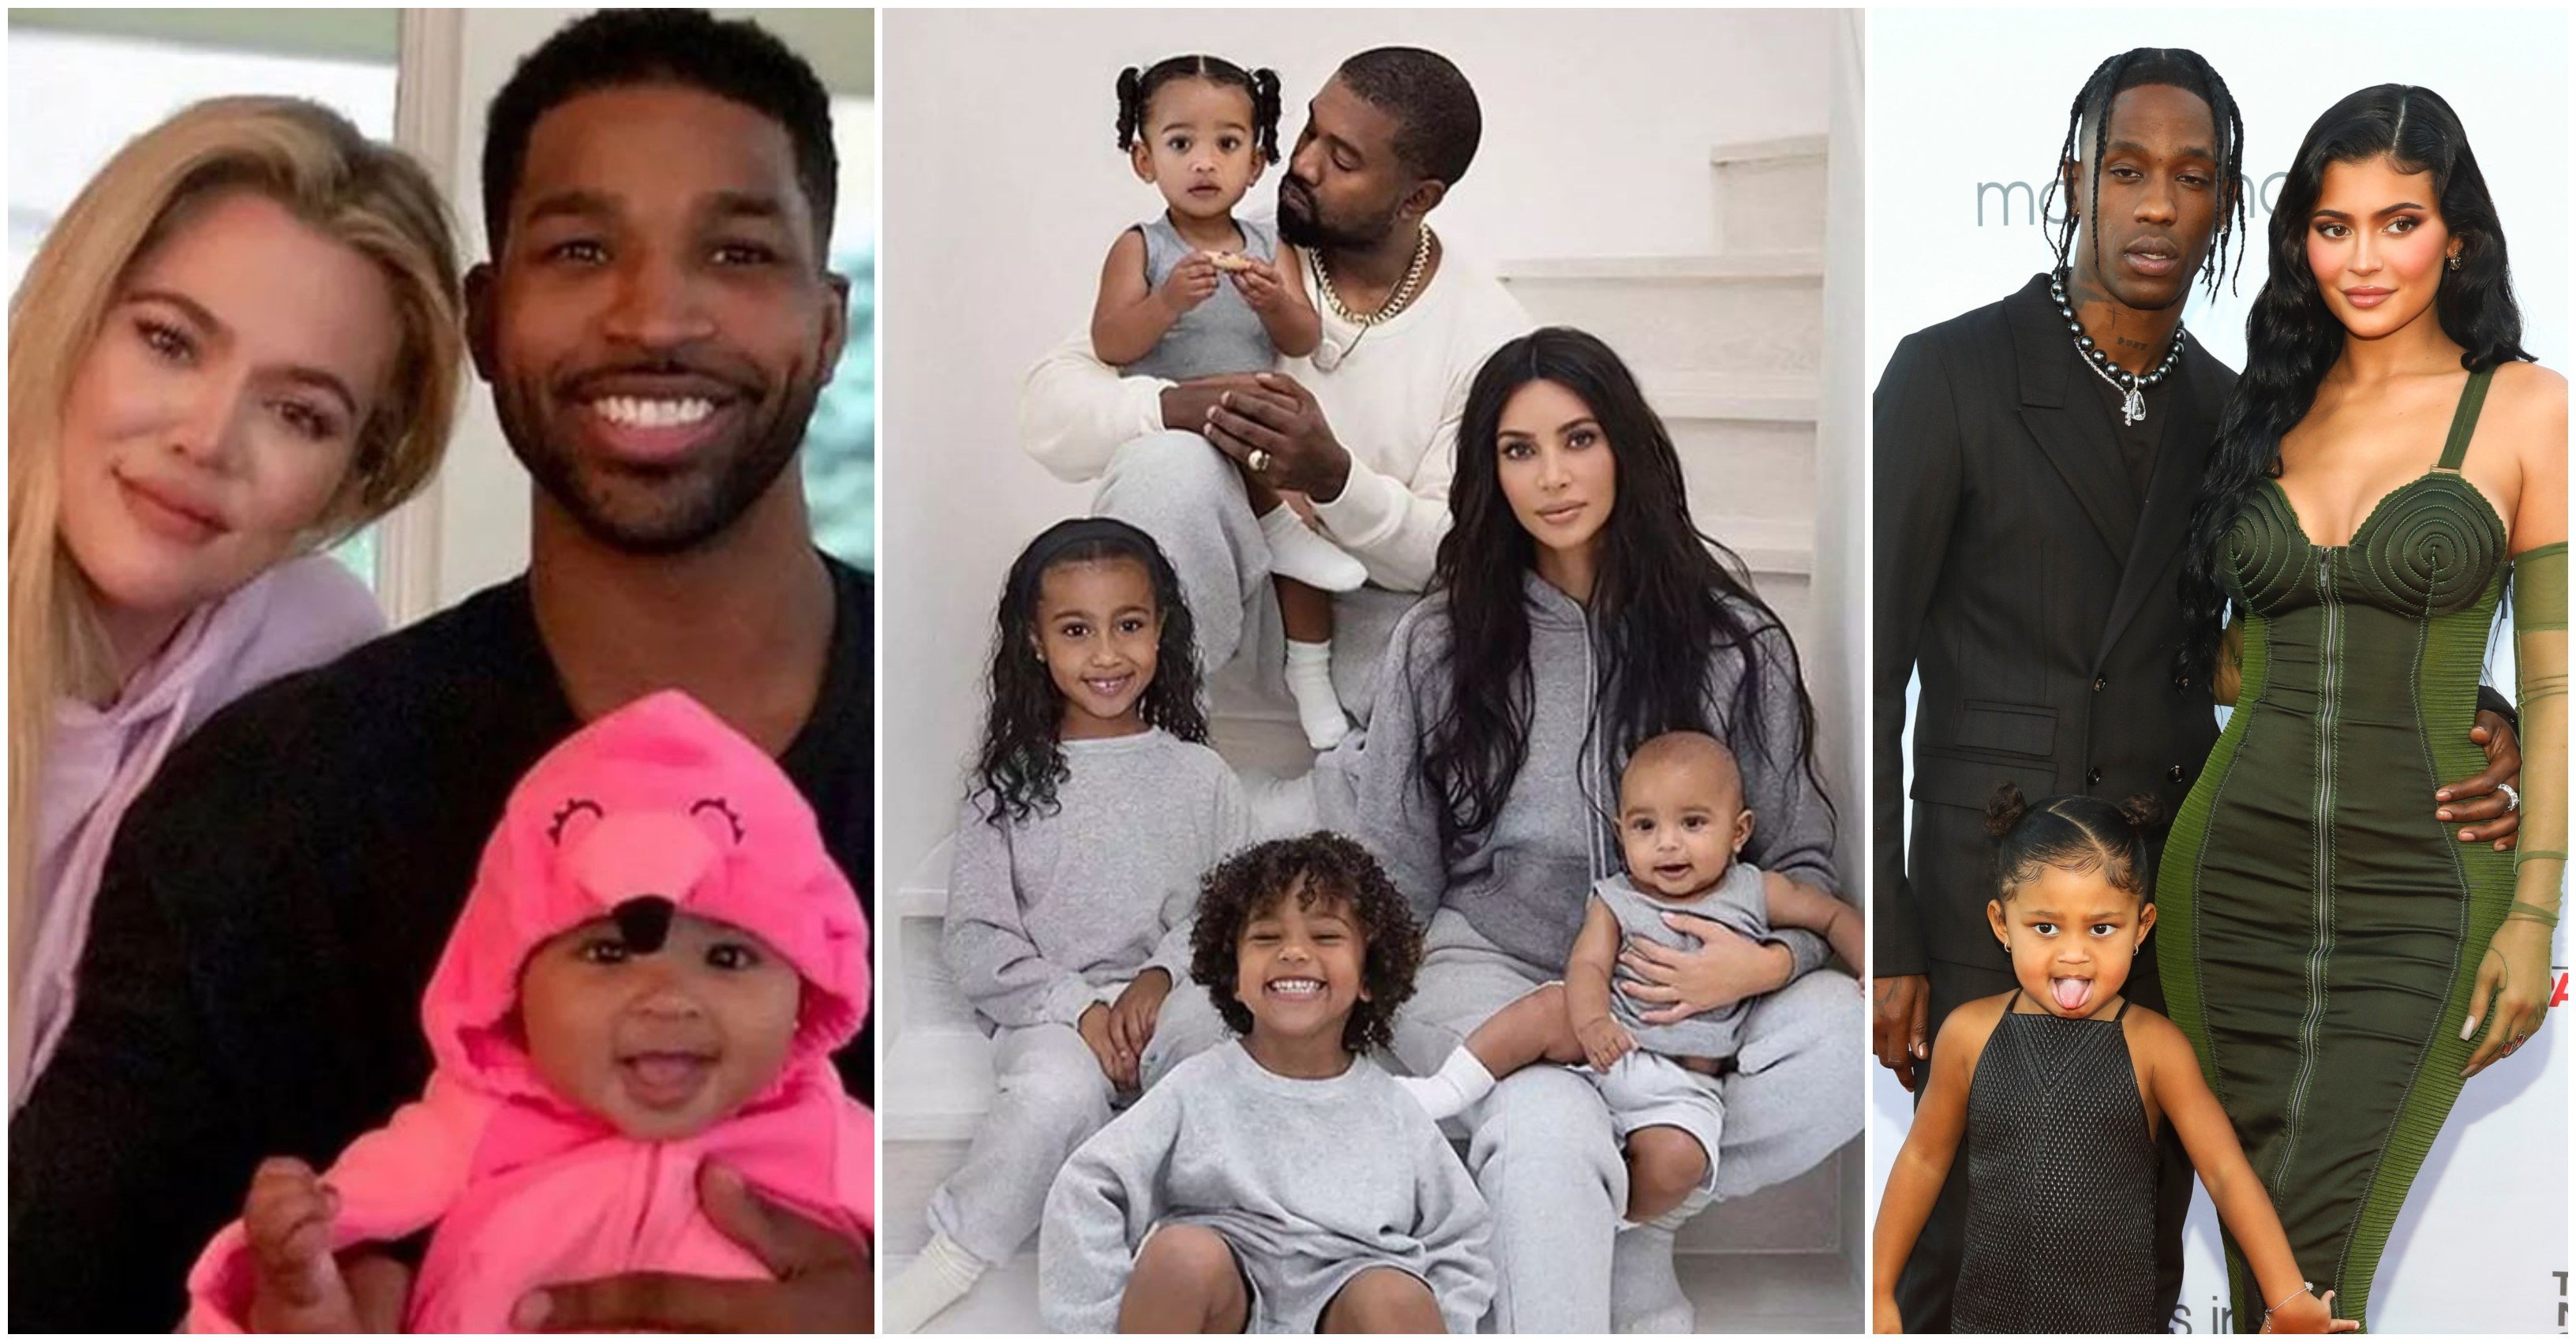 What do the Kardashian and even Jenner sisters have in common? They’ve all made sure their children share the same dad, no matter what. Photos: @khloekardashian, @kimkardashian,/Instagram, AP